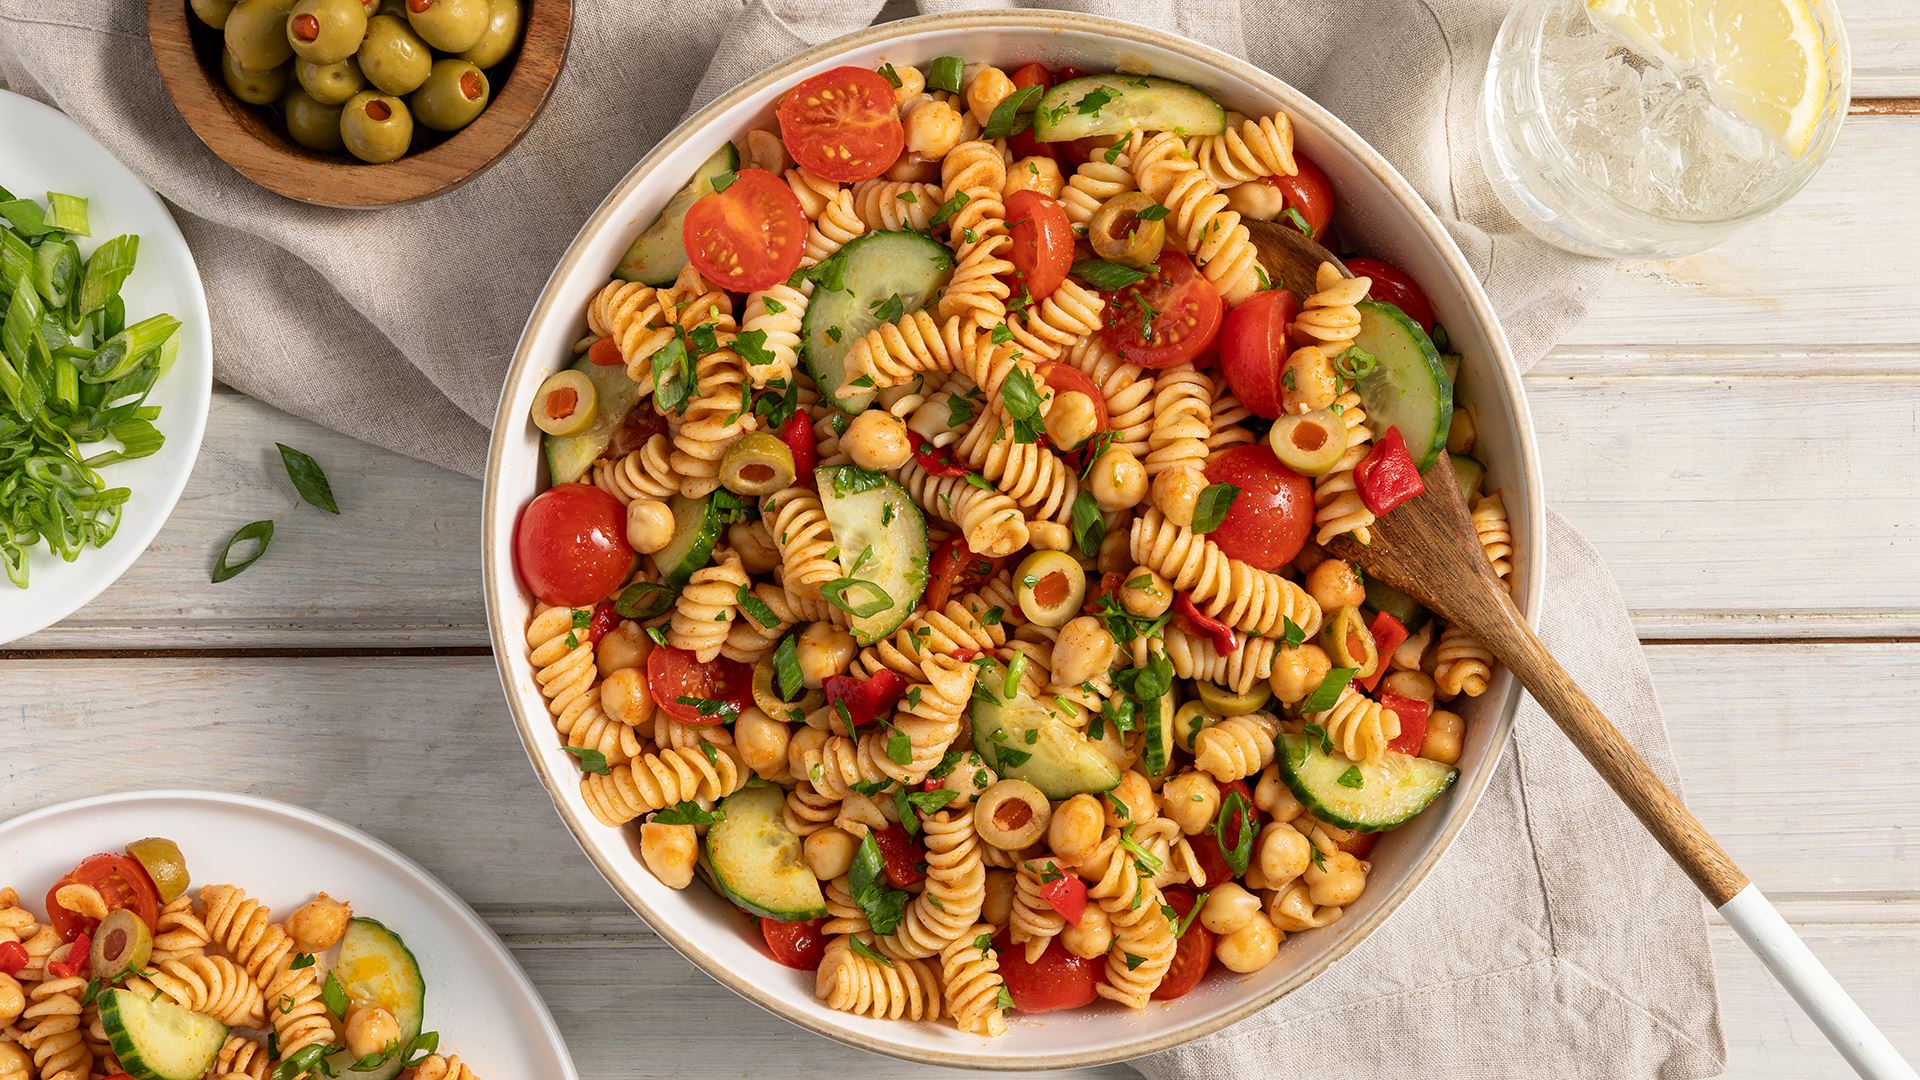 Pasta Salad with Chickpeas and Roasted Red Peppers